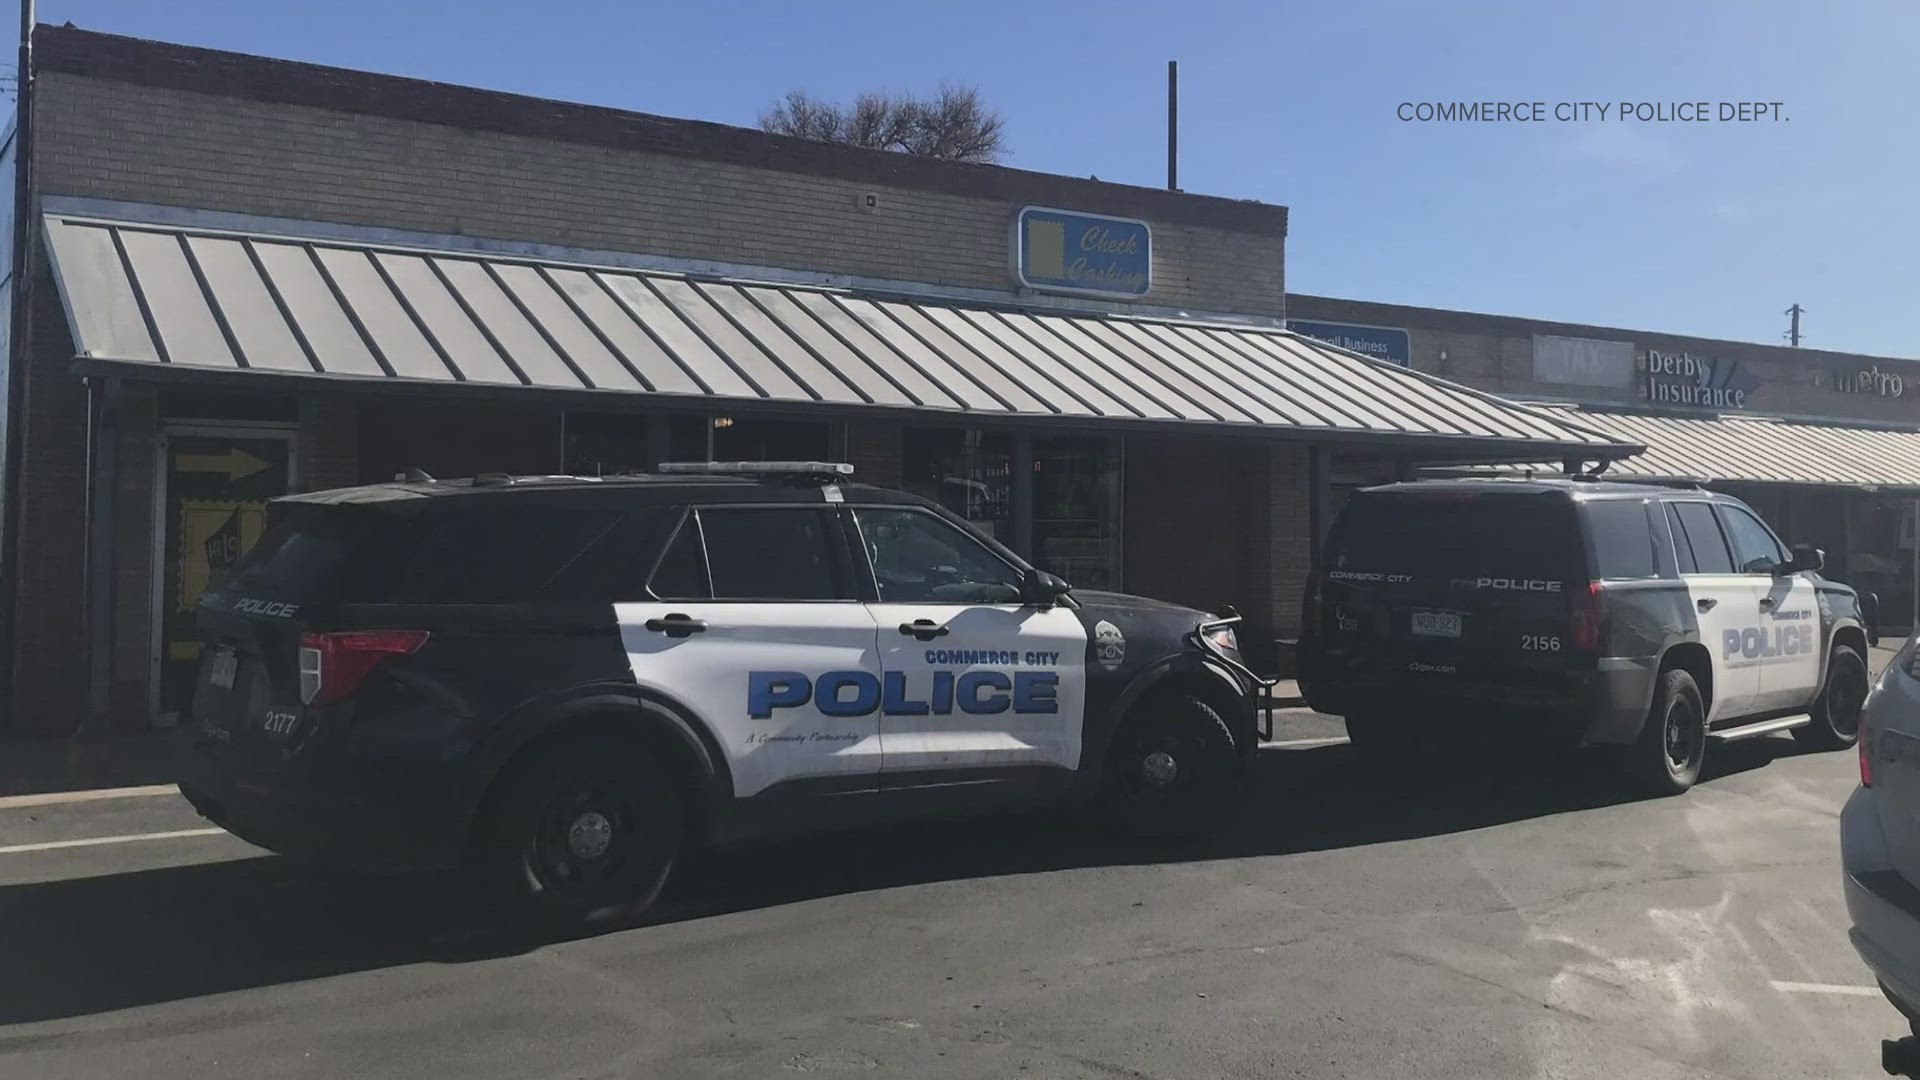 Police said they arrested two of the three suspects in the armed robbery of a check cashing business in Commerce City.